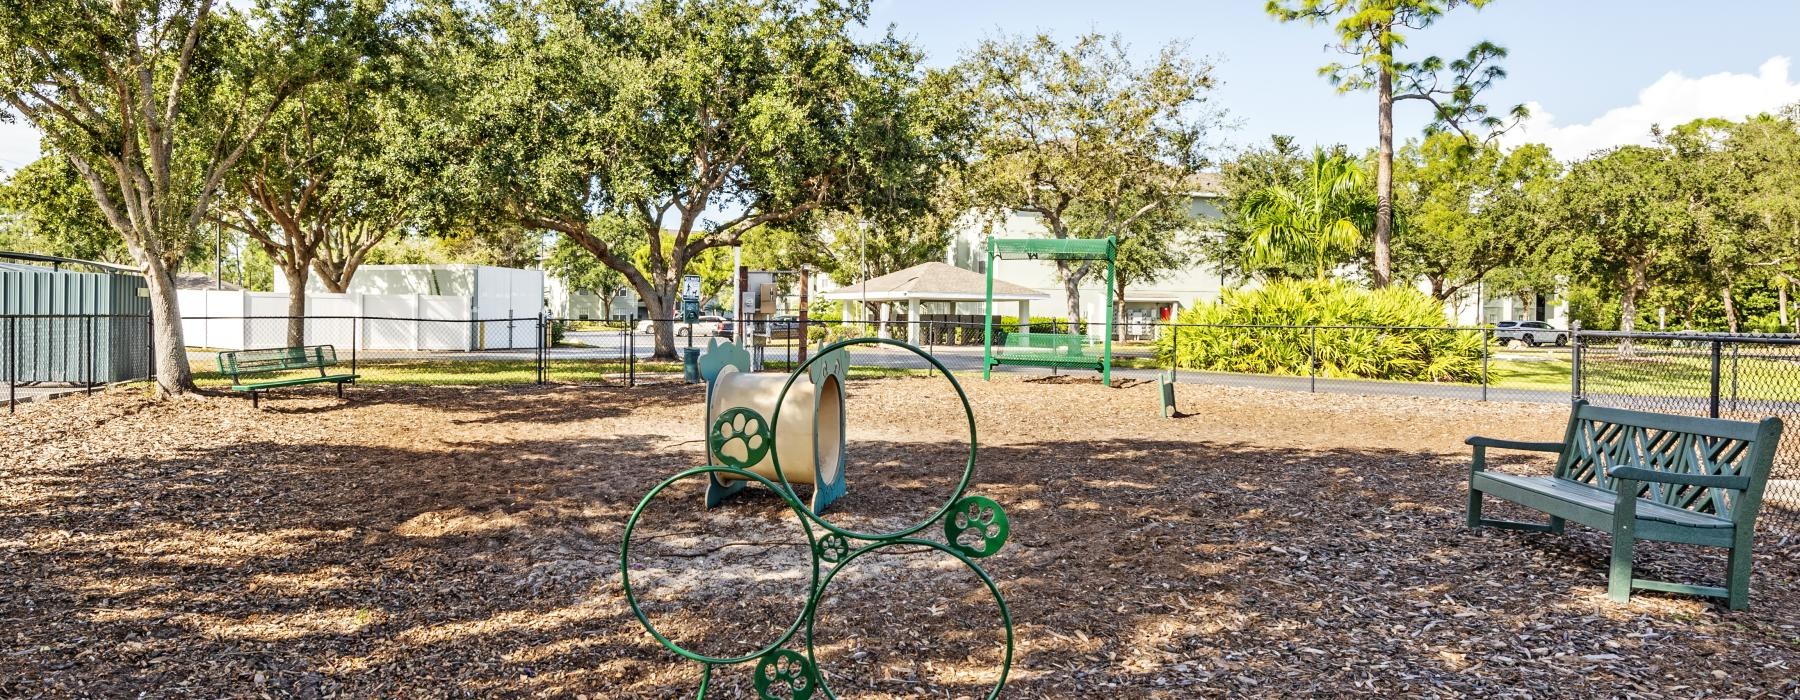 a playground with a bench and a bike rack